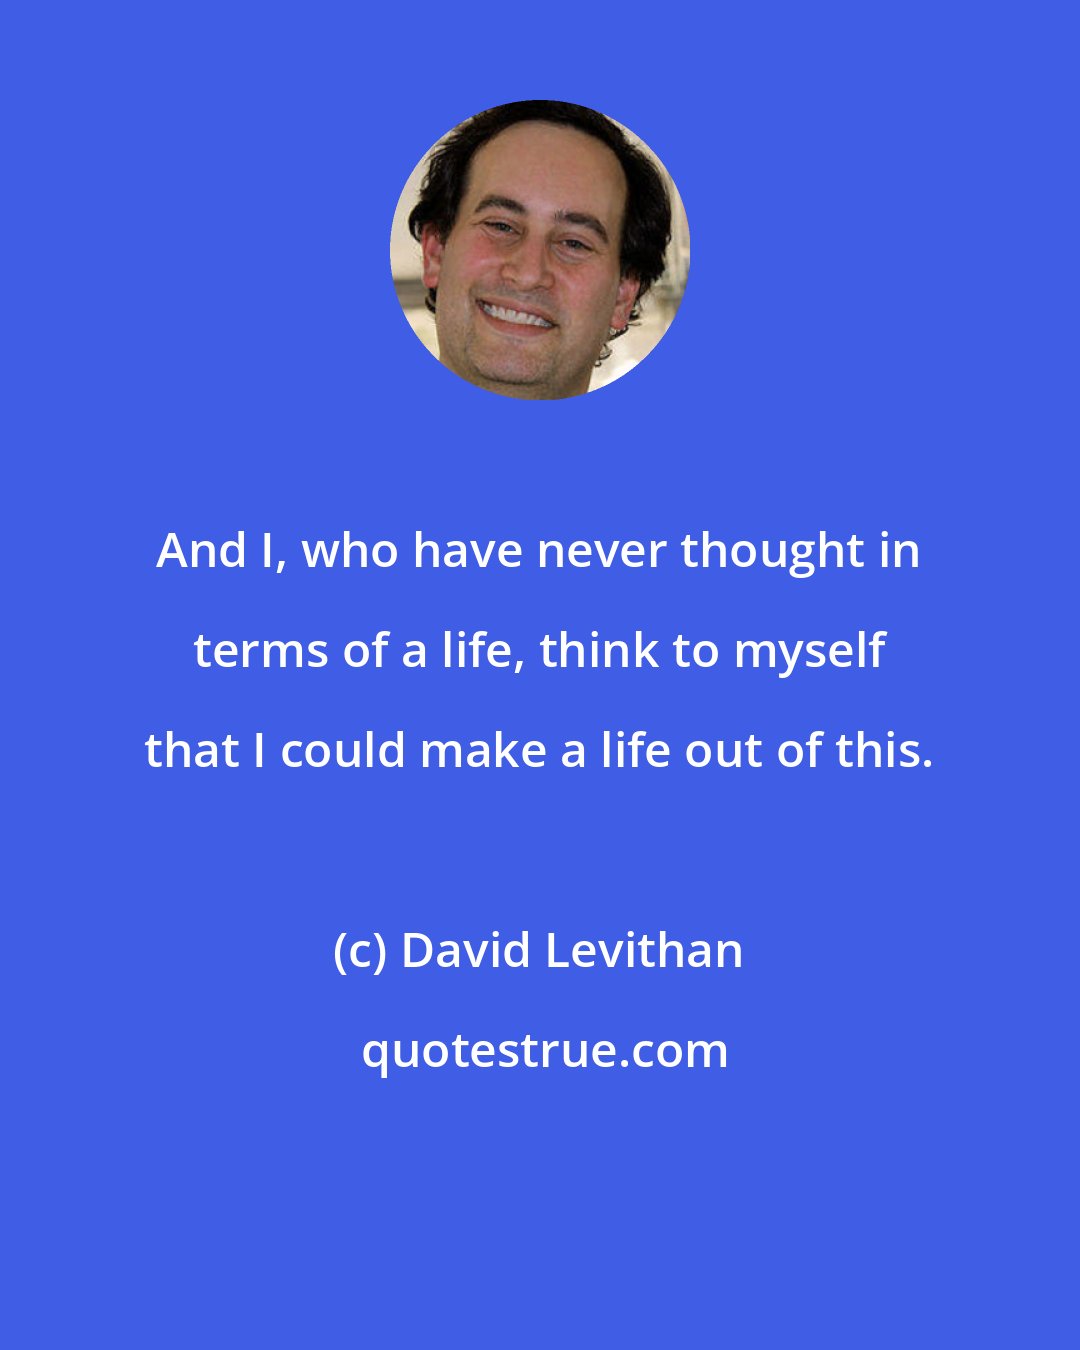 David Levithan: And I, who have never thought in terms of a life, think to myself that I could make a life out of this.